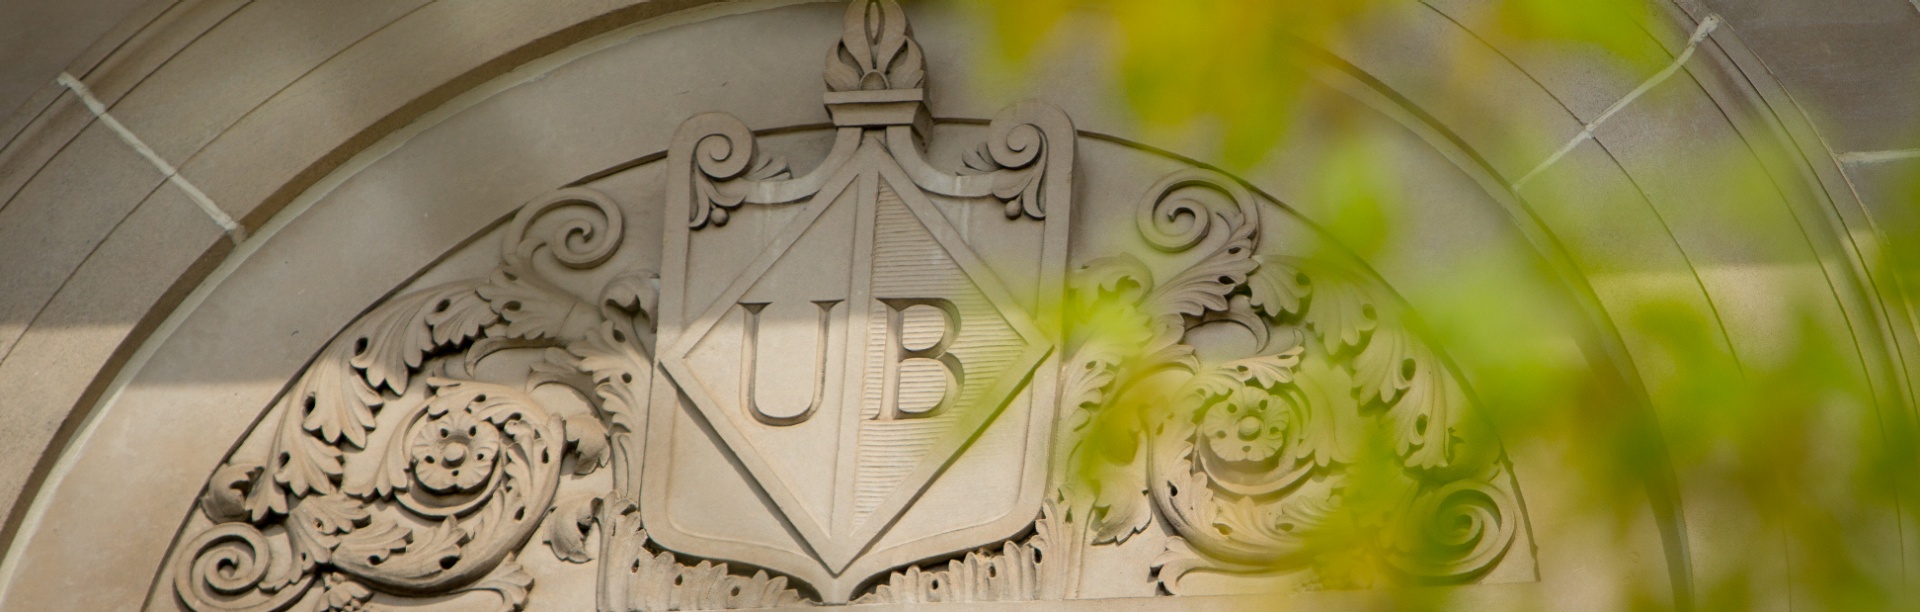 UB engraving on a stone building exterior. 